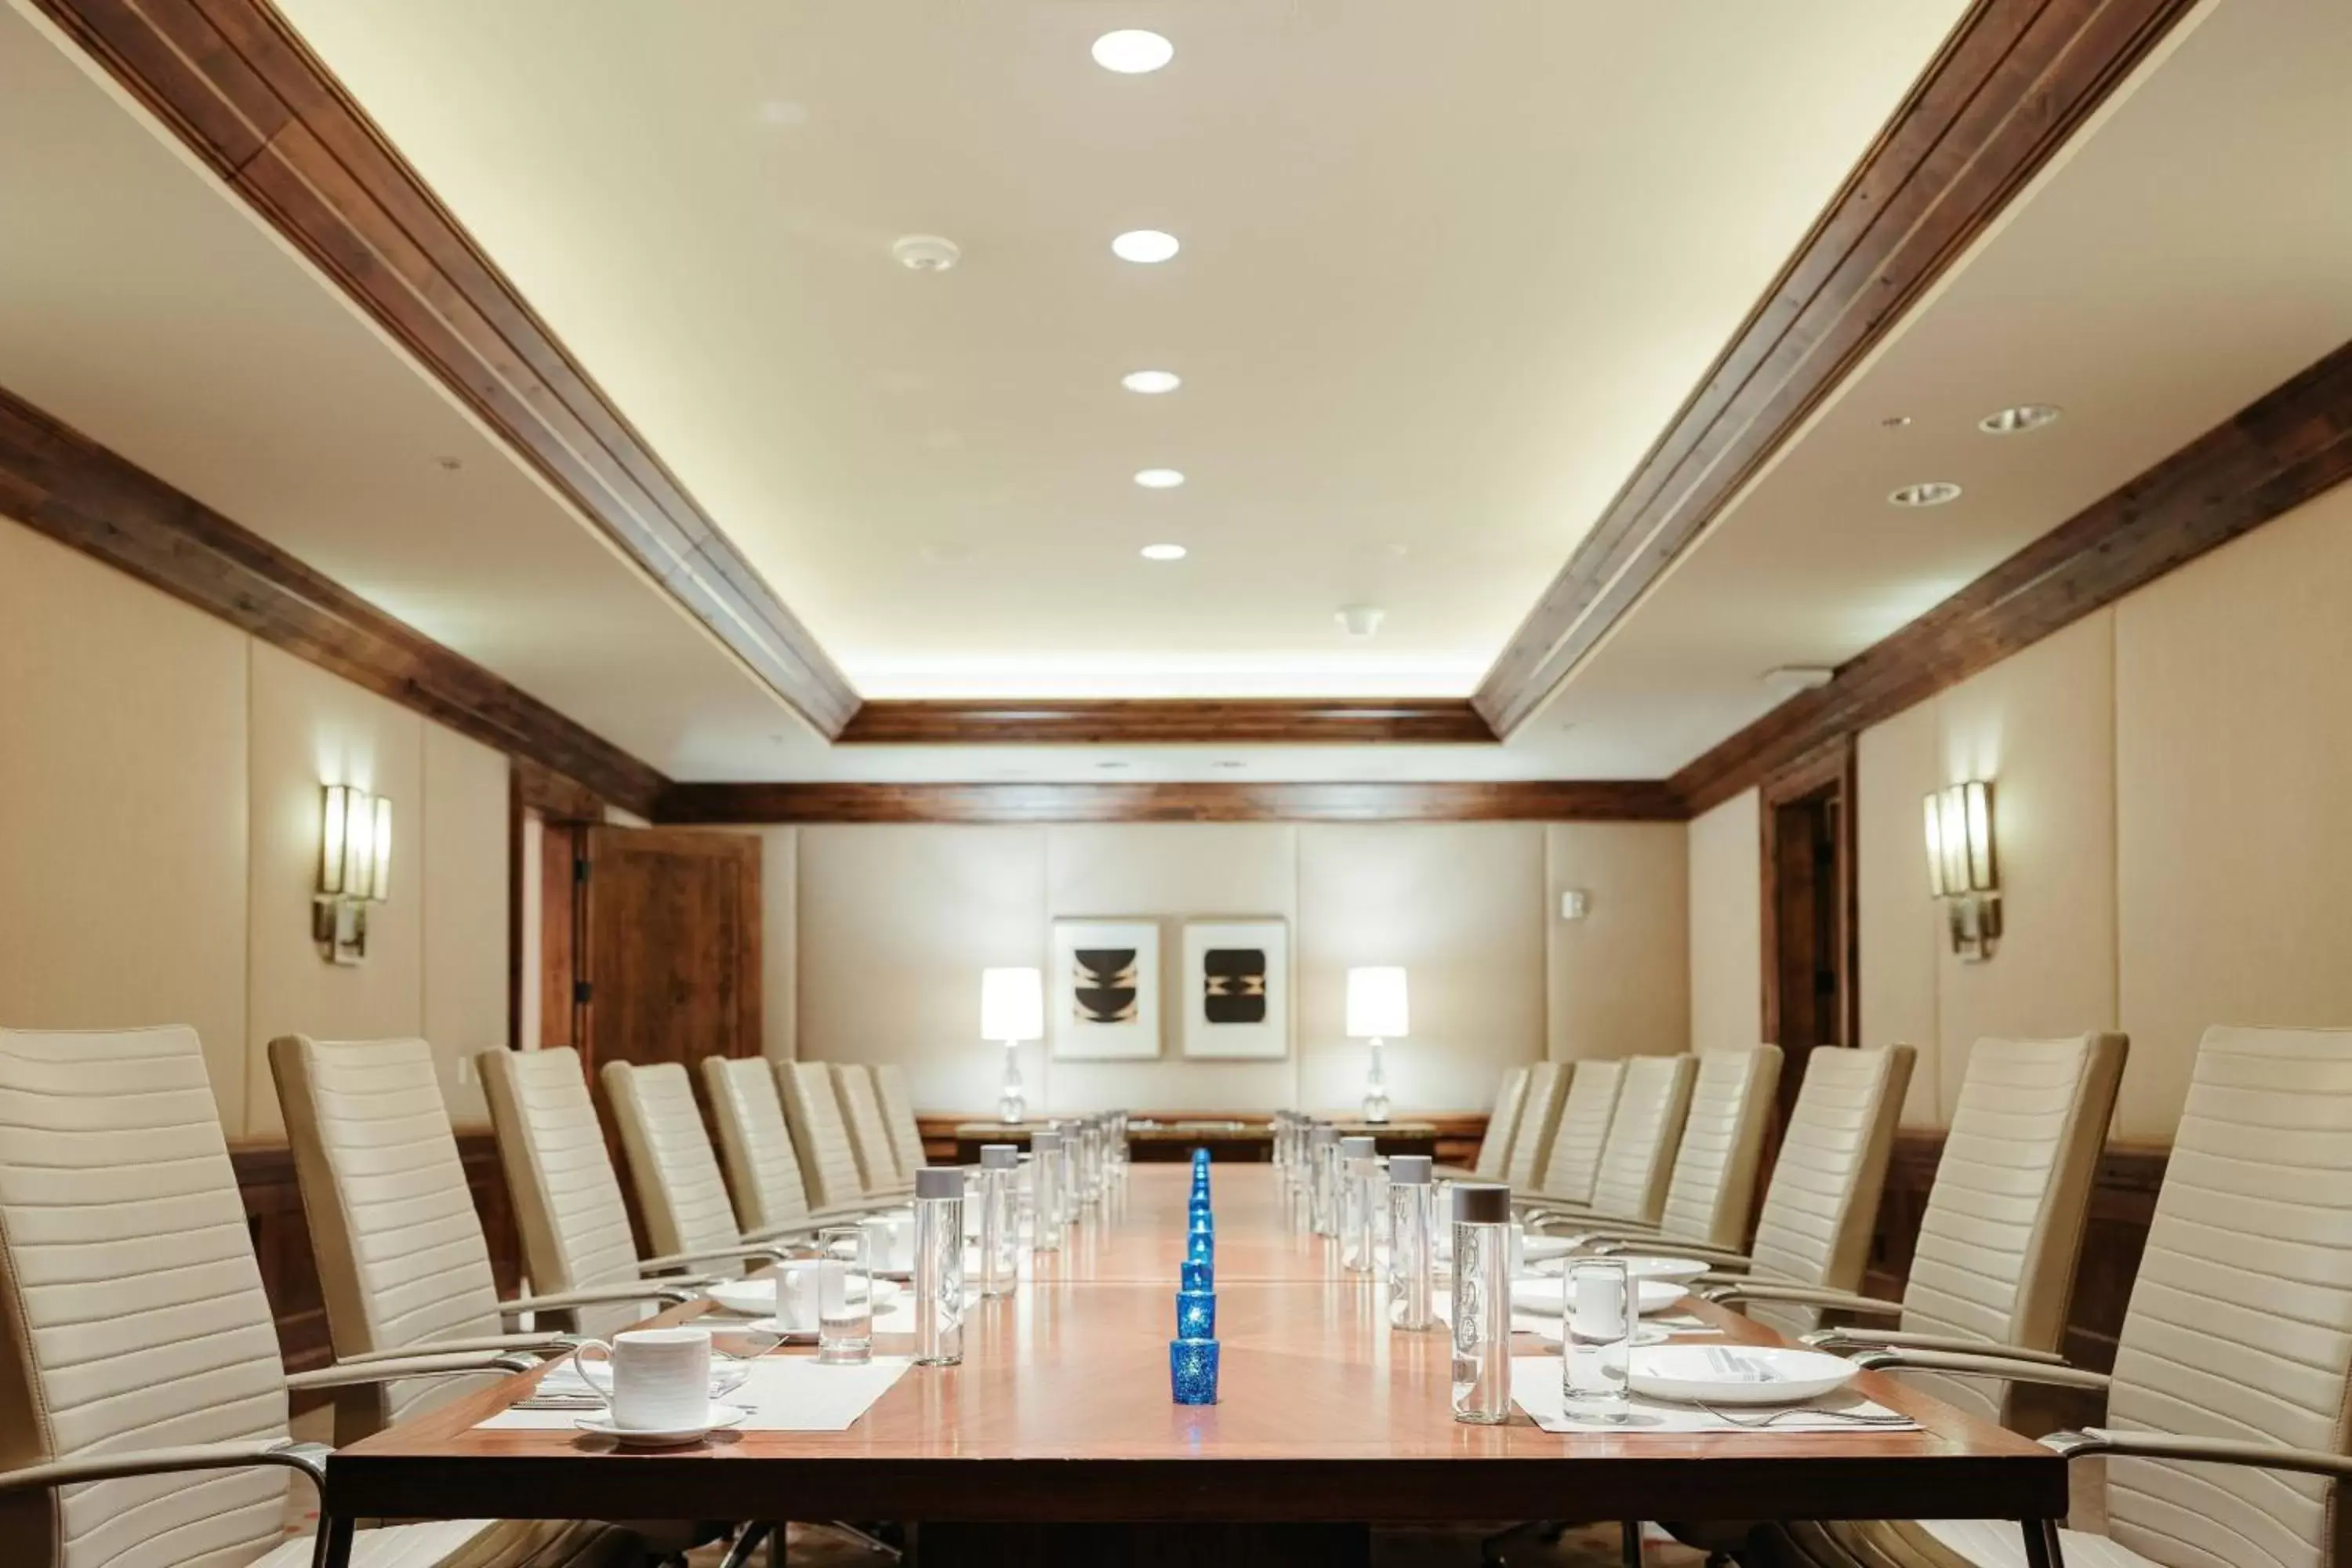 Meeting/conference room in The Ritz-Carlton, Dove Mountain